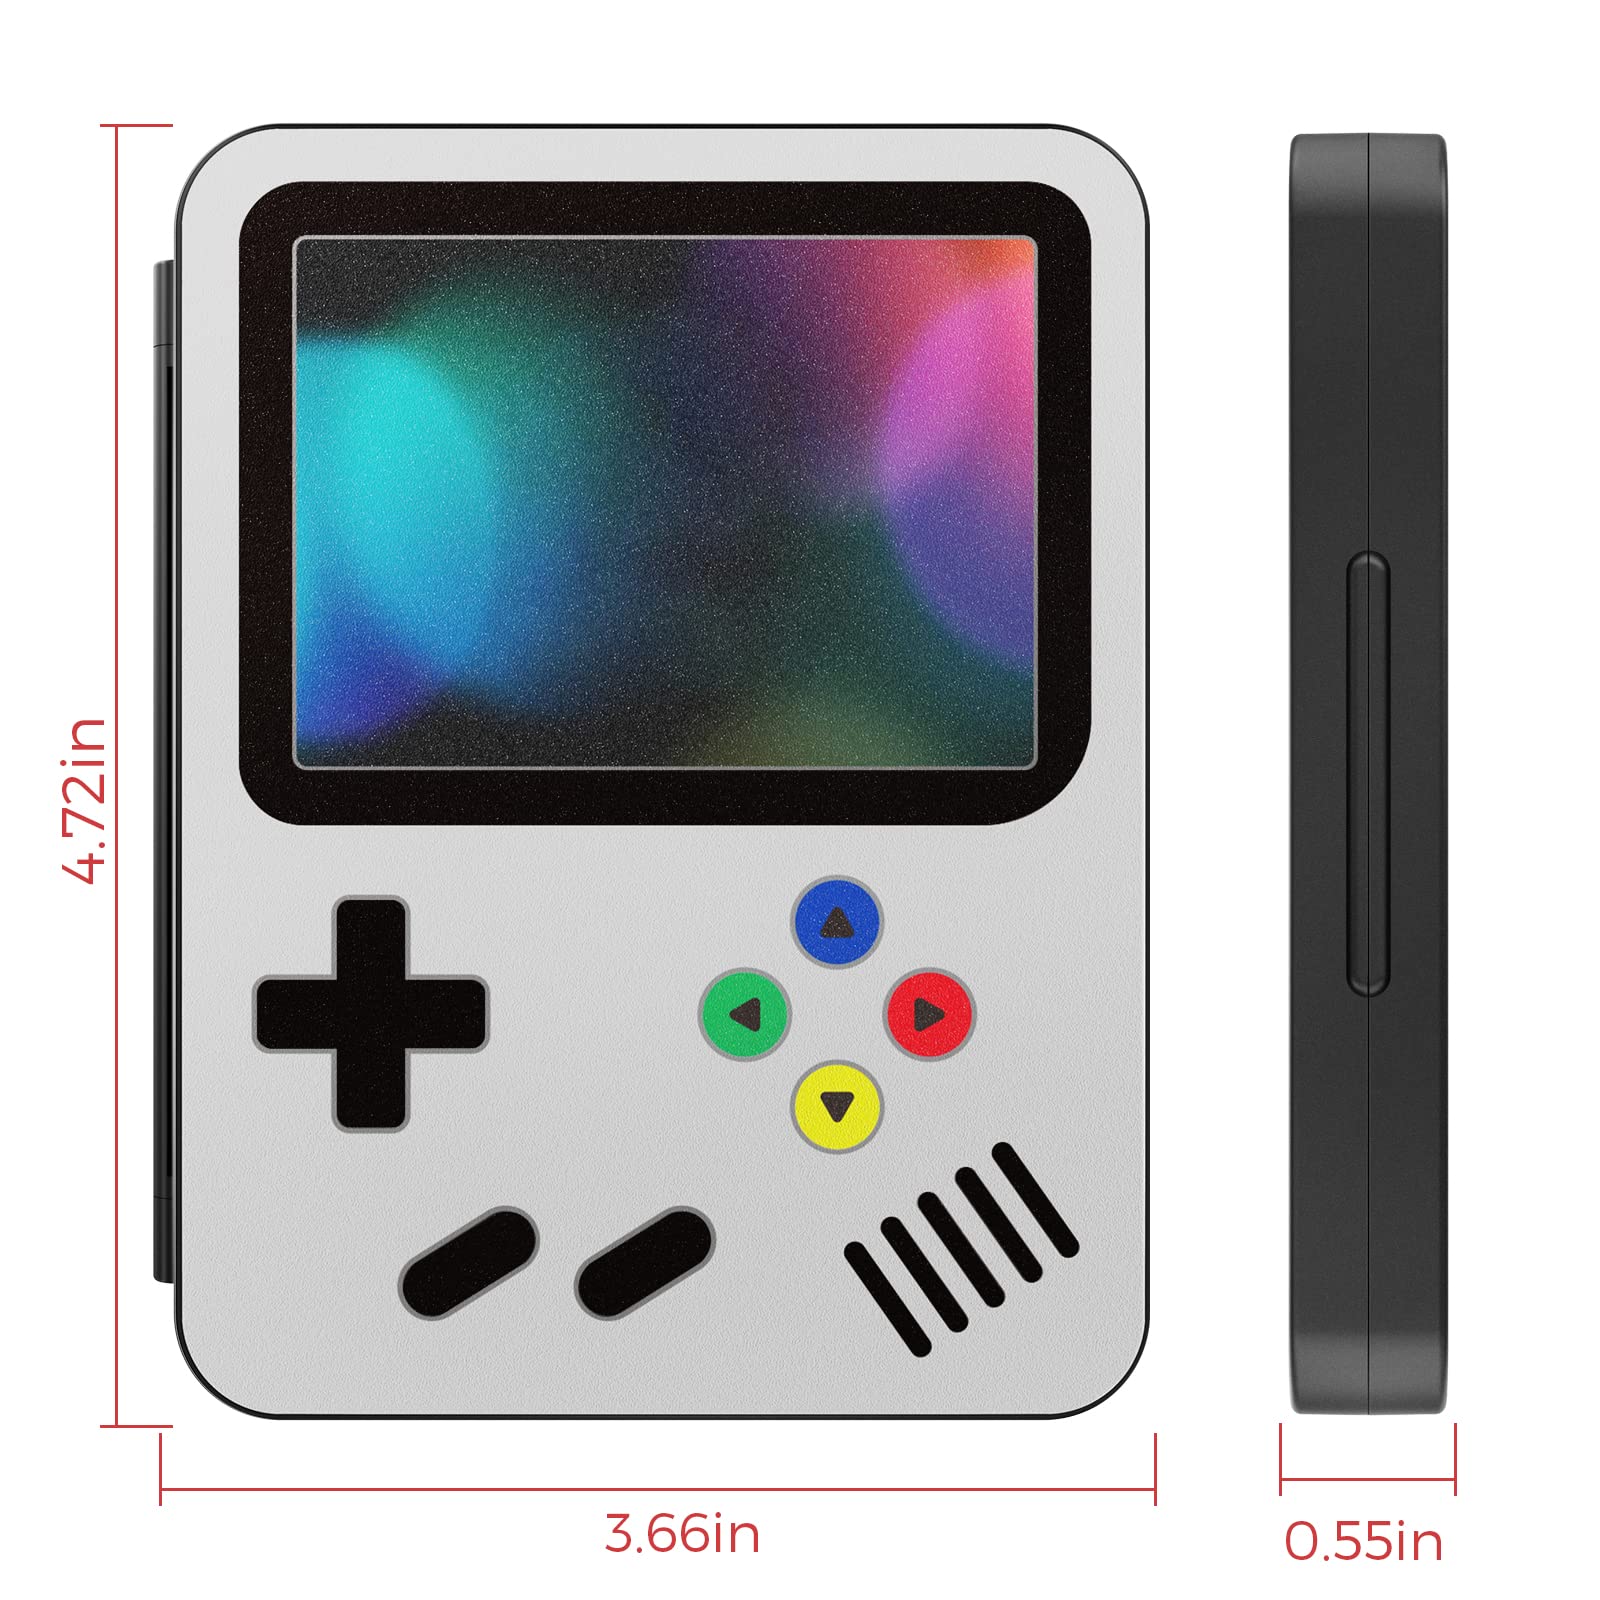 HEIYING Game Card Case for Nintendo Switch&Switch OLED,Customized Pattern Design Switch Lite Game Card Storage Case with 16 Game Card Slots and 16 Micro SD Card Slots.